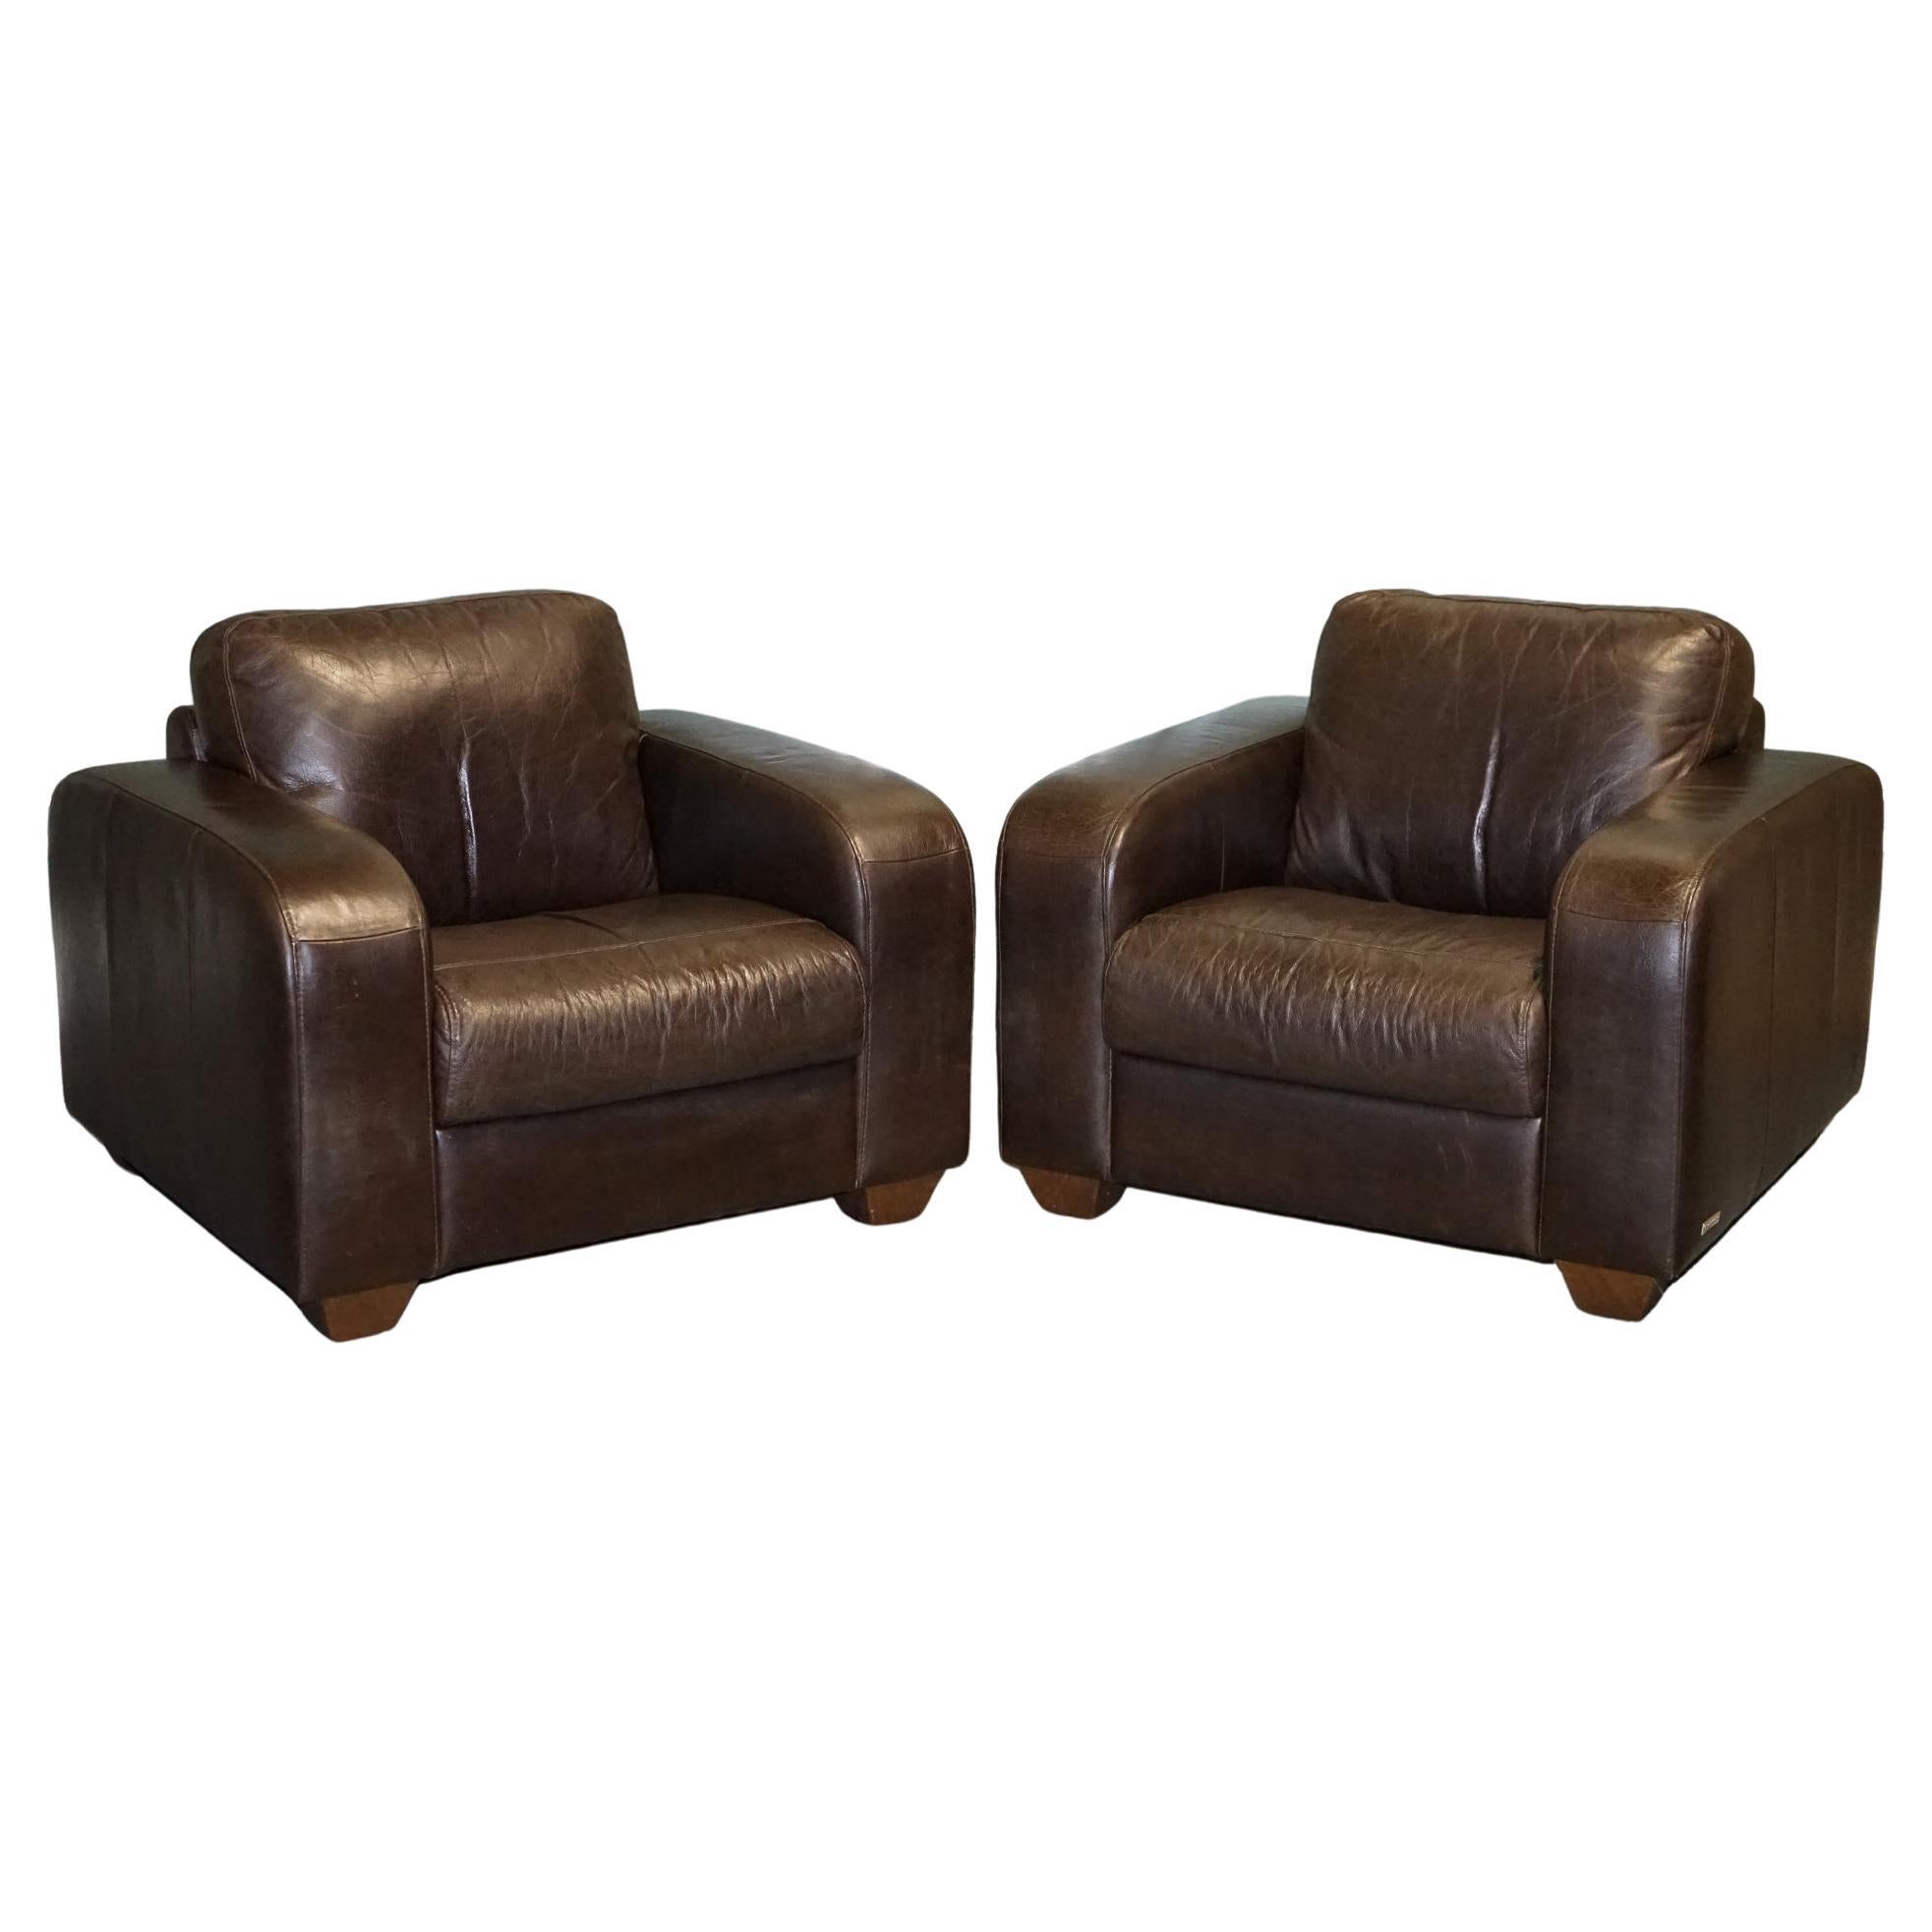 Very Comfortable Vintage Pair of Chocolate Brown Leather Armchairs by Sofitalia For Sale